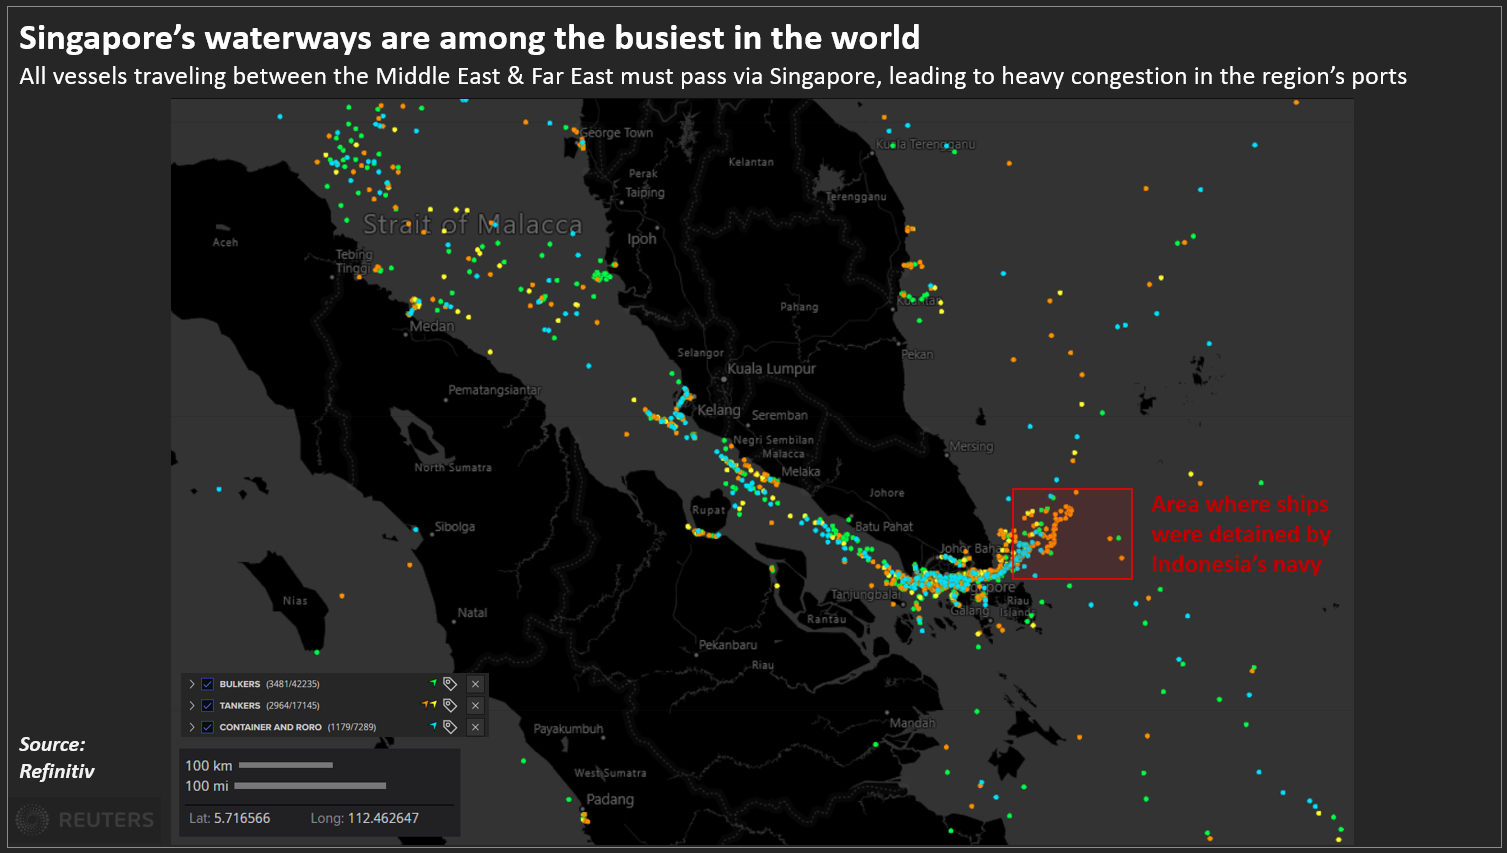 Singapore’s waterways are among the busiest in the world